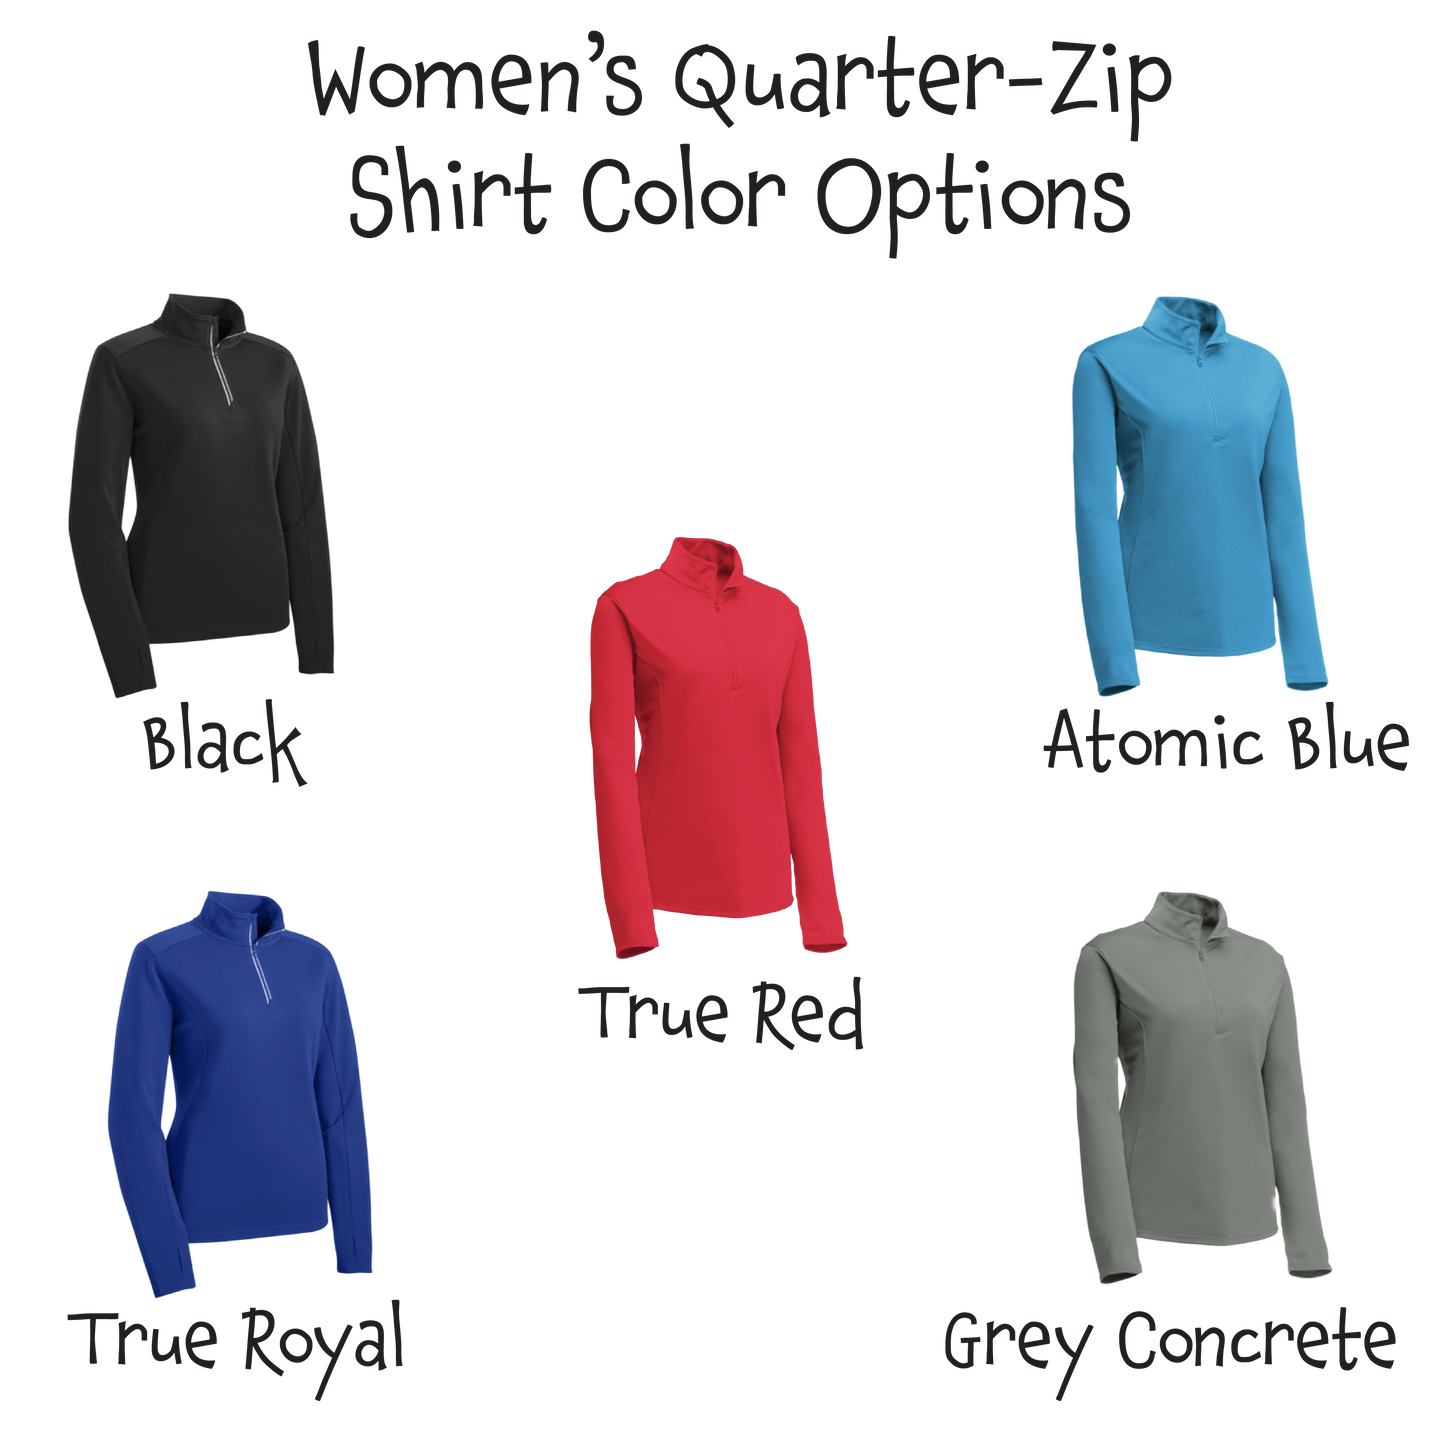 Dink | Women's 1/4 Zip Pickleball Athletic Pullover | 100% Polyester